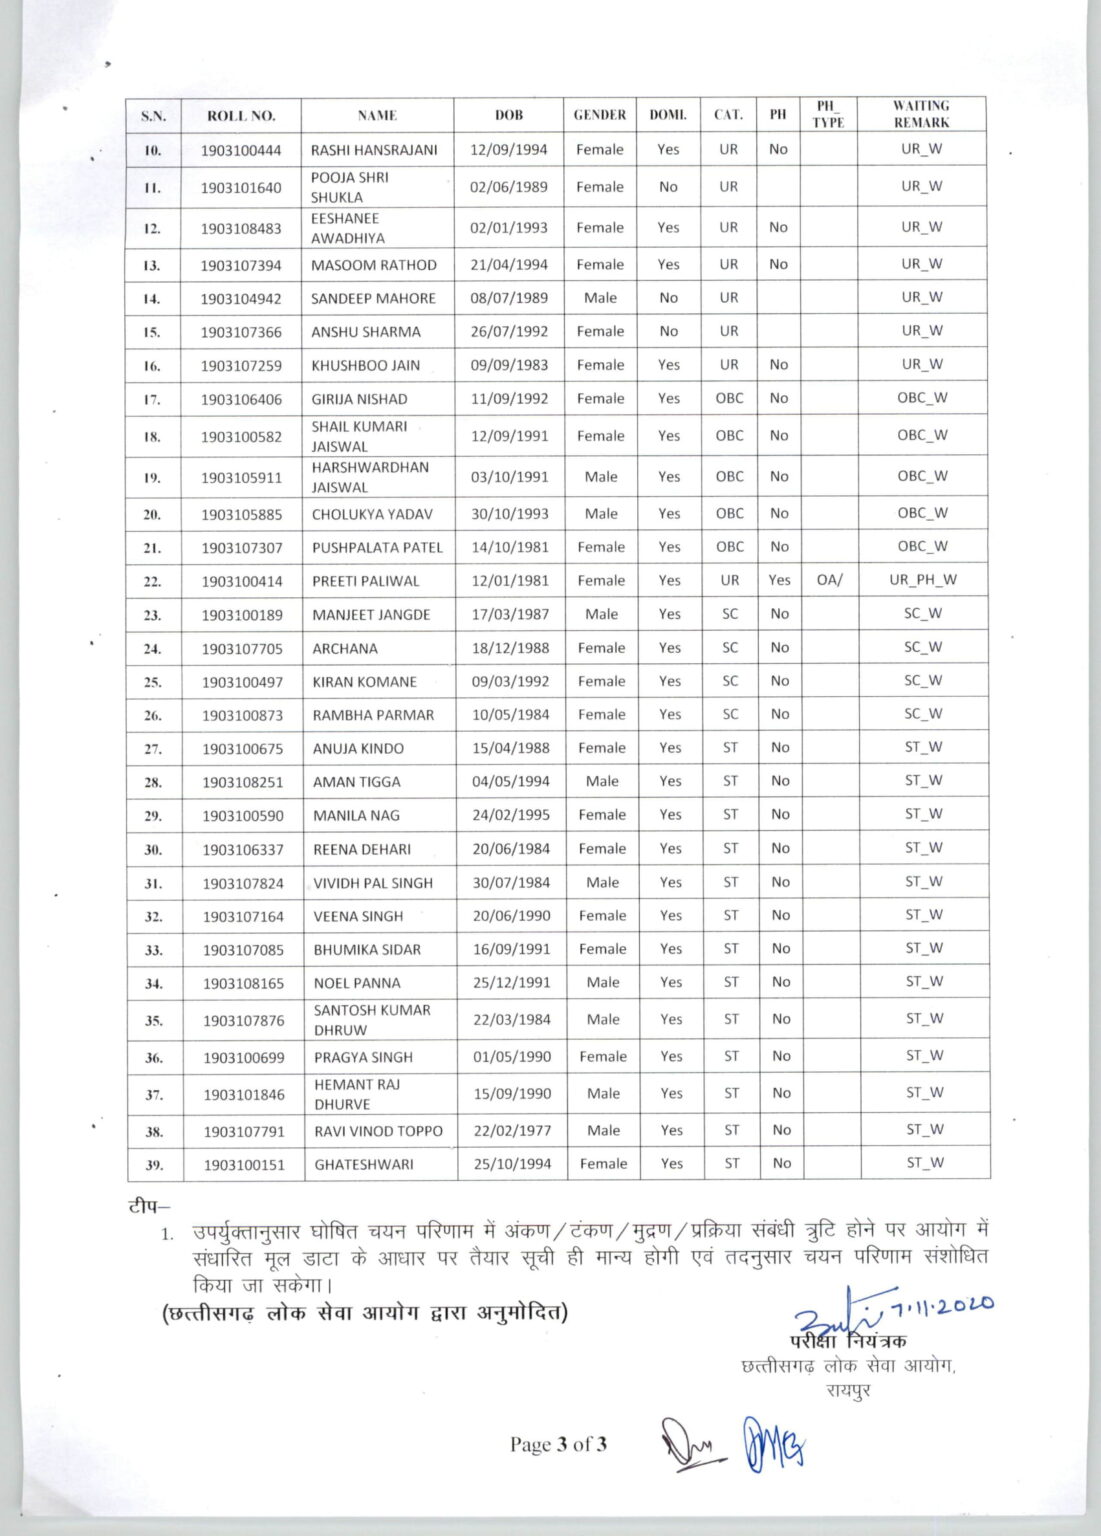 cgpsc-released-the-list-of-civil-judge-examination-2019